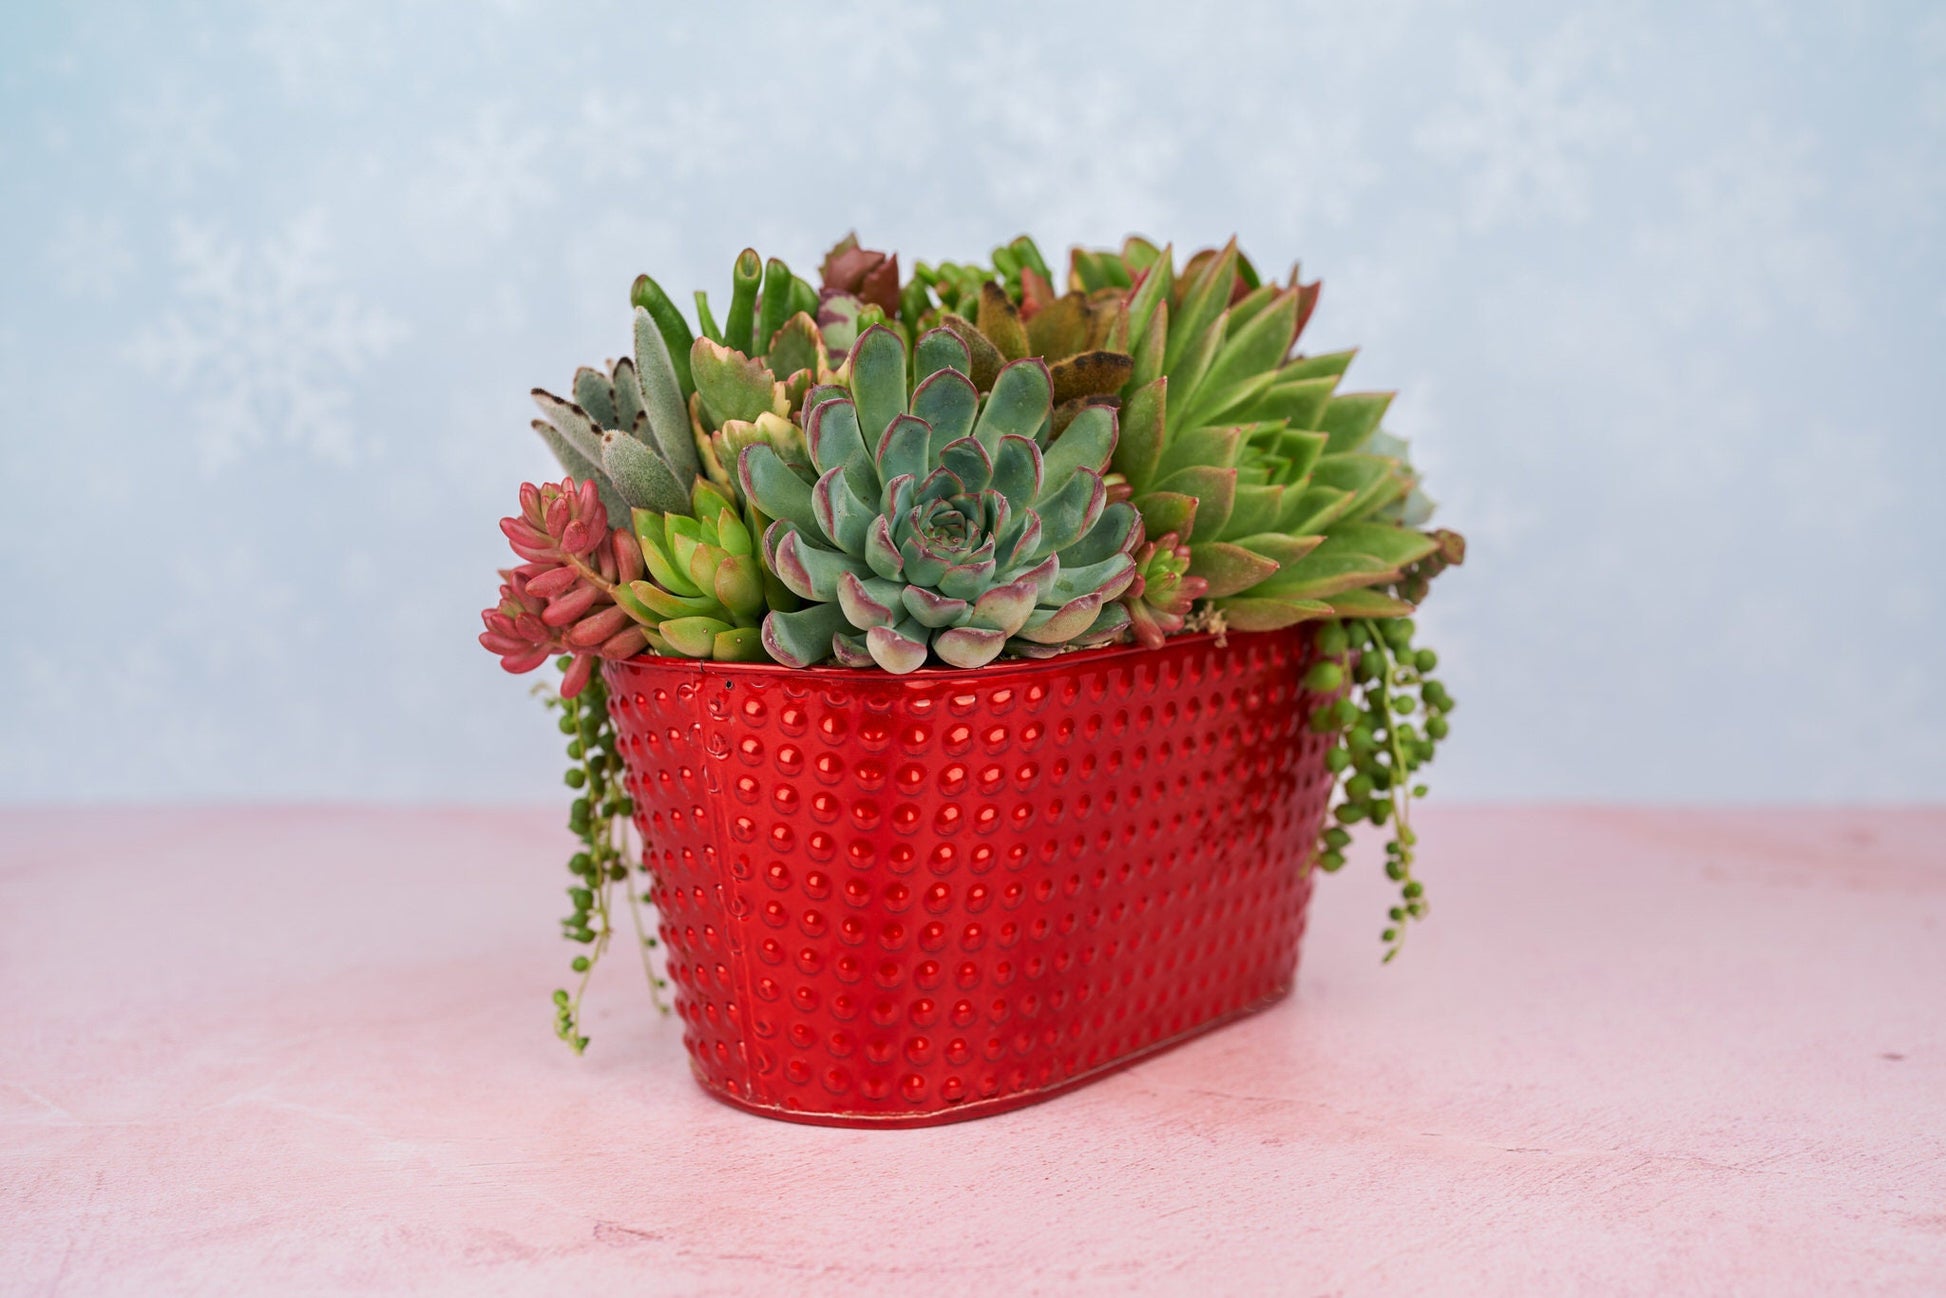 Red Christmas Living Succulent Arrangement Container with Bow: Living Succulent Gift & Home Decor for Christmas and Winter Holidays